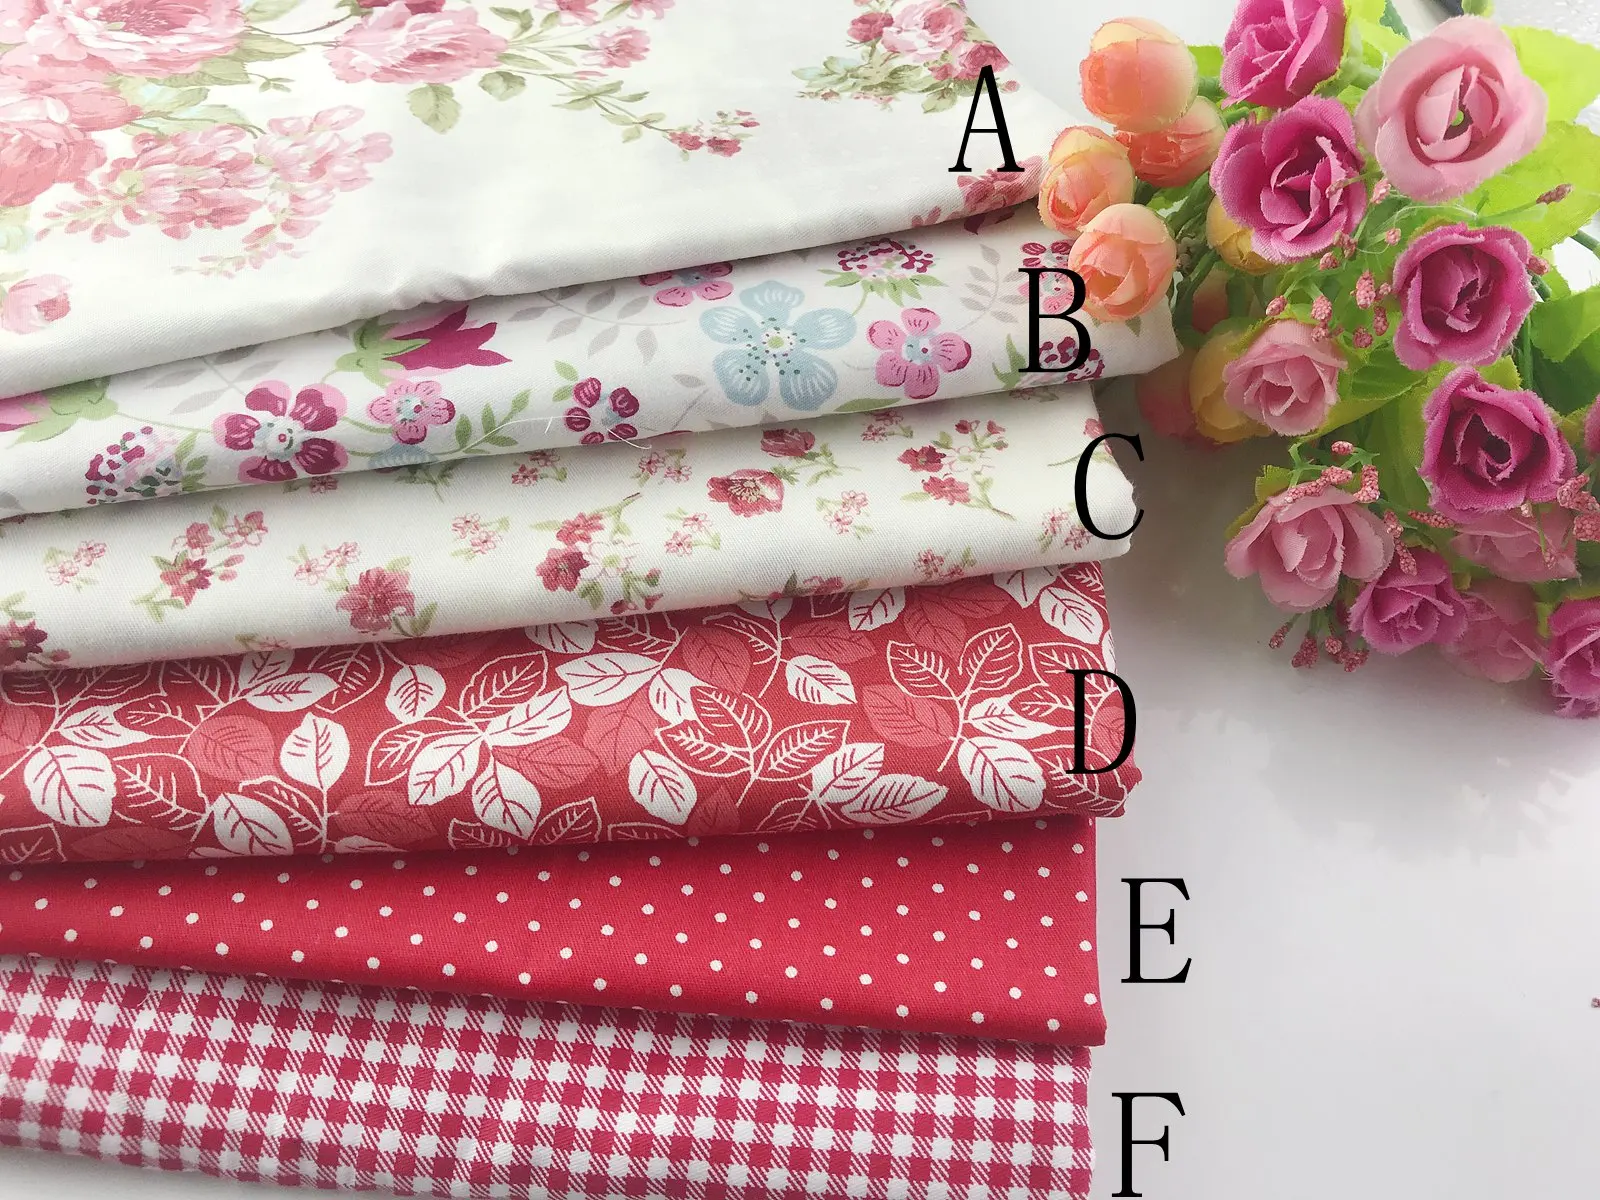 Delicate (50cmx50cm) Red Fat Quarter Bundle 100% cotton Fabric Quilting fabric Home Textile Bedding Sewing Doll Cloth DIY